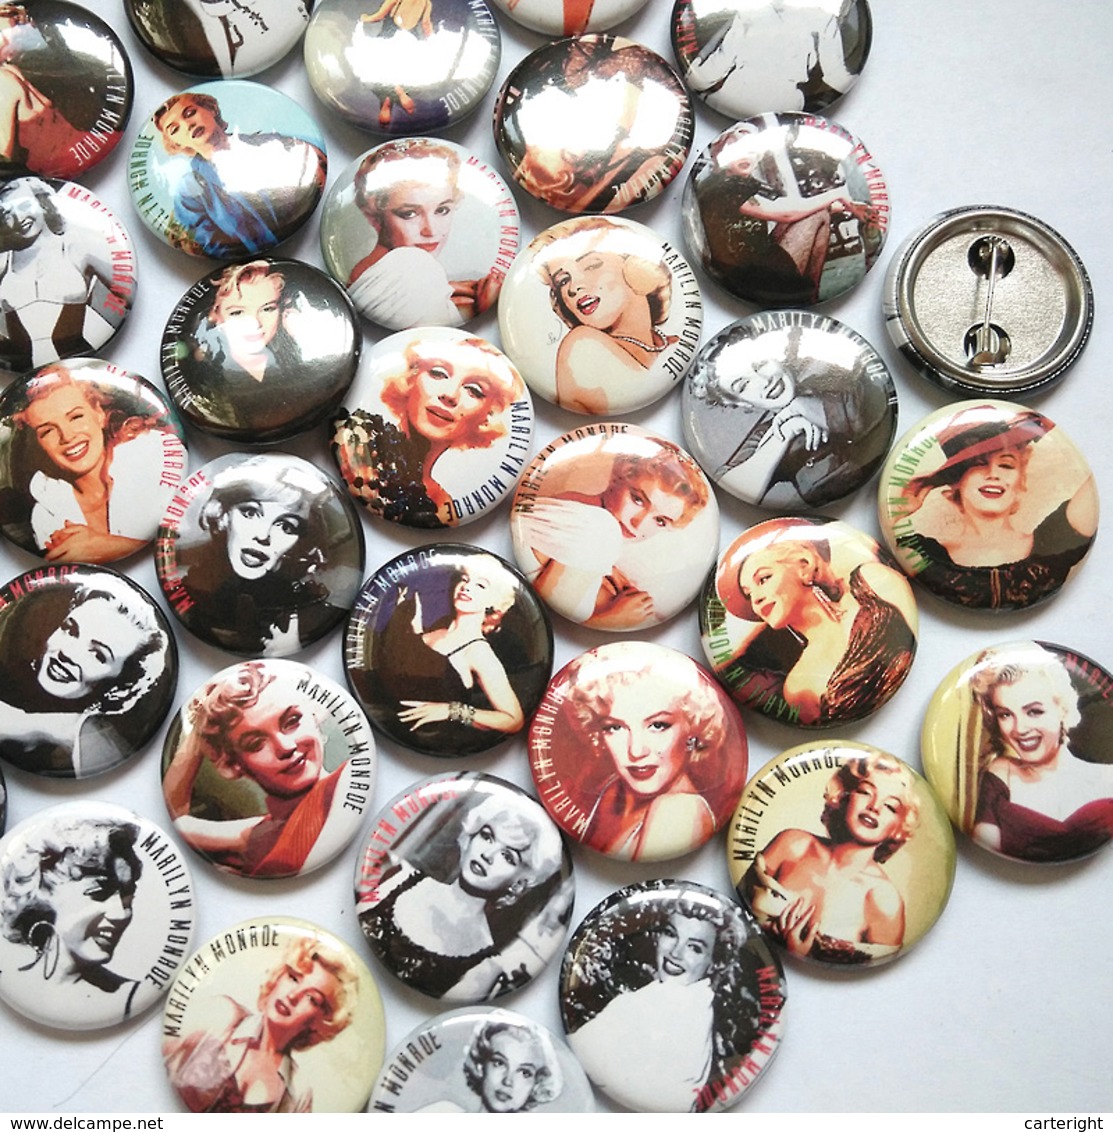 Marc chagall painting fan ART BADGE BUTTON PIN SET 6 (1inch/25mm diameter) 35 DIFF